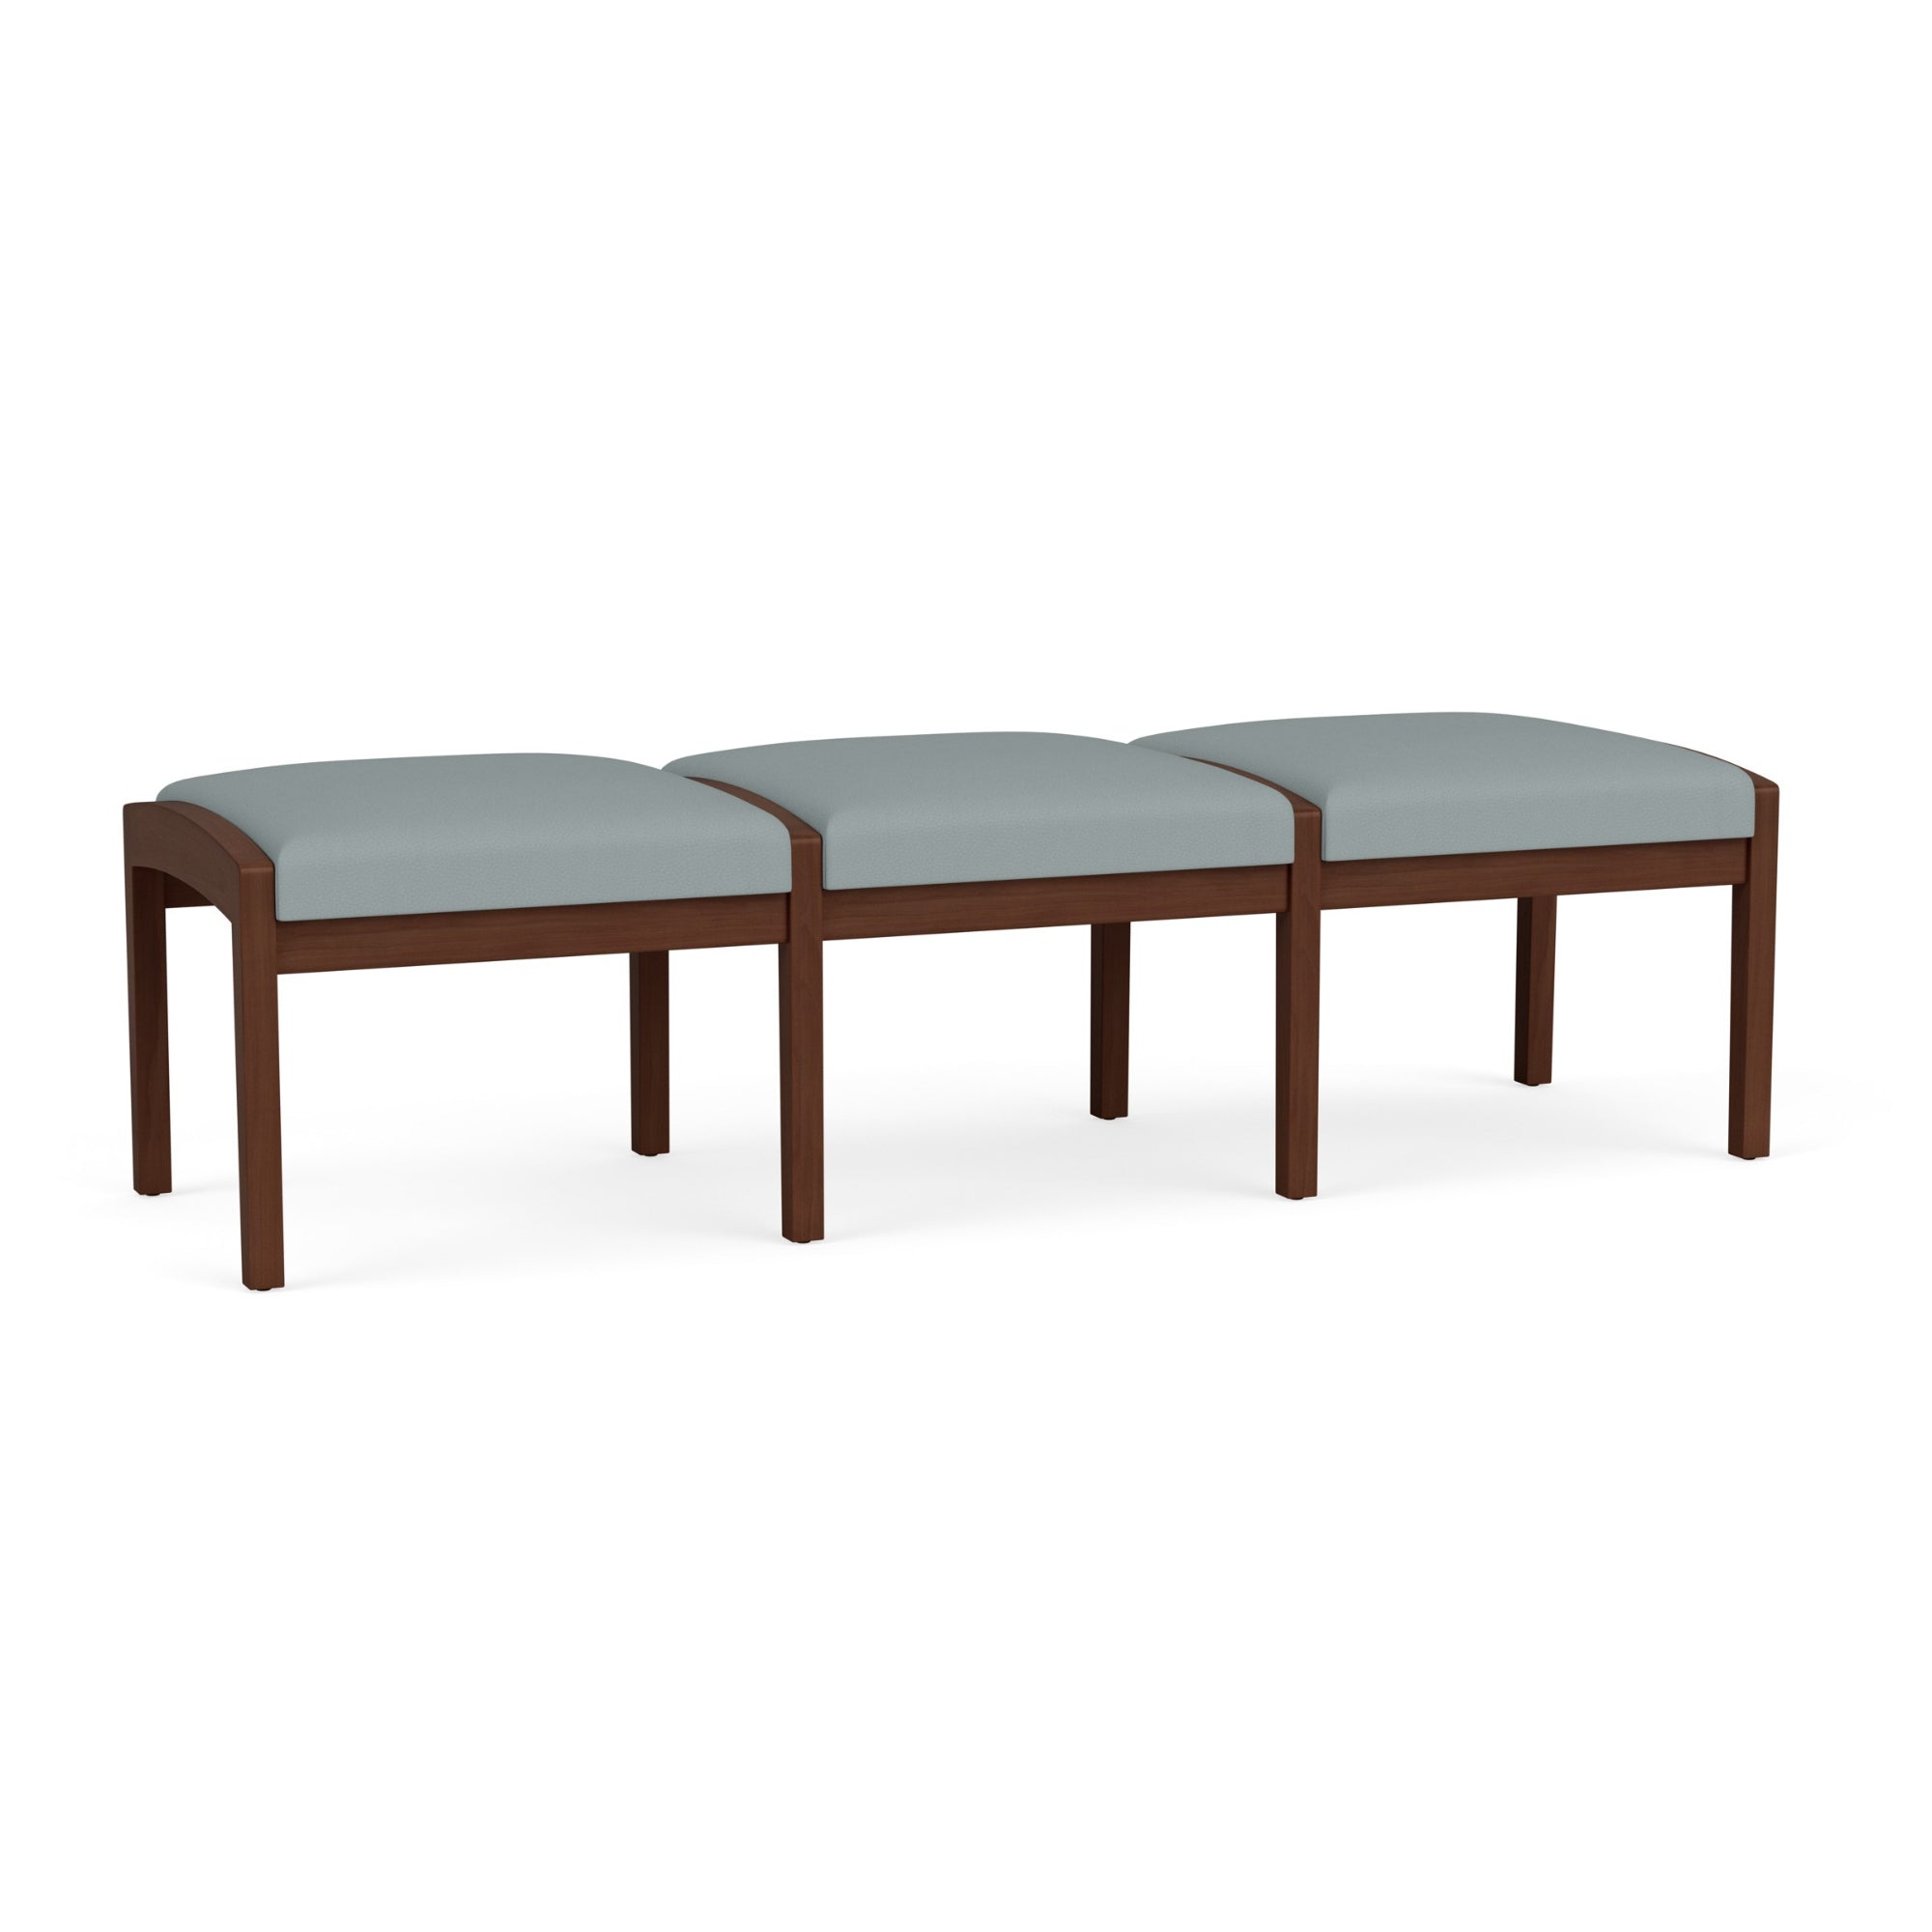 Lenox Wood Collection Reception Seating, 3 Seat Bench, Standard Fabric Upholstery, FREE SHIPPING